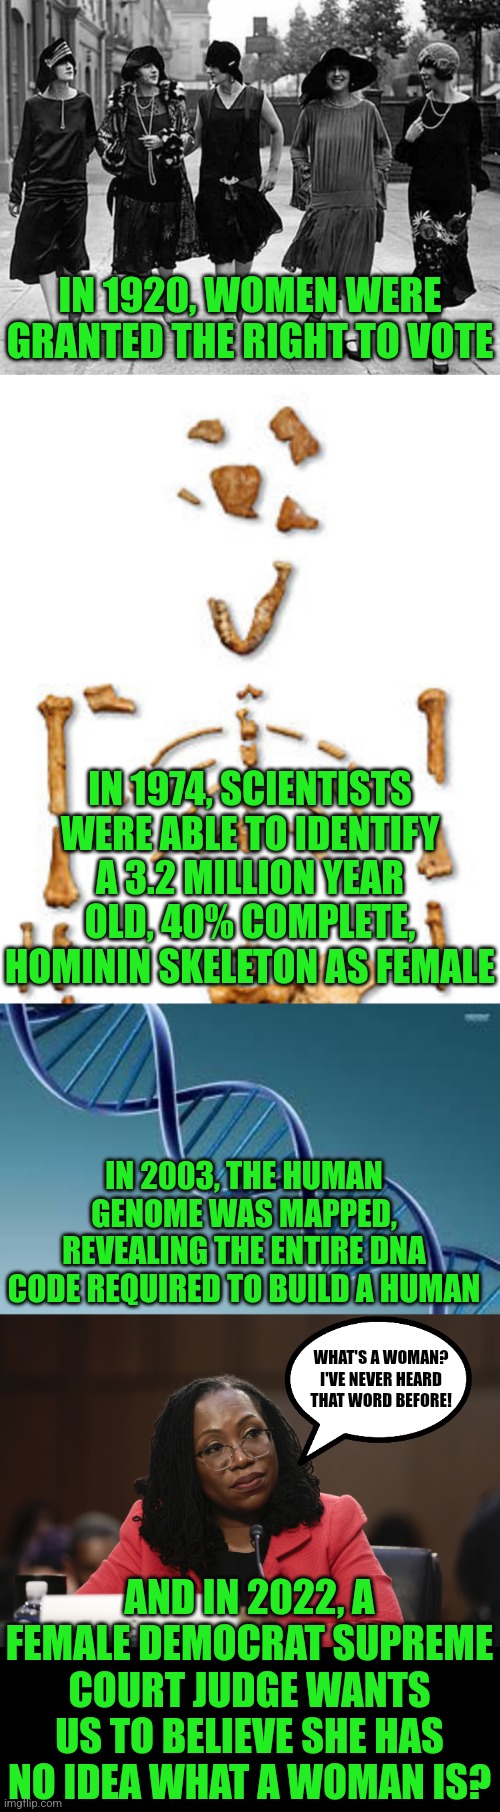 Science is much like crime in many ways. If a Democrat is in charge, it gets worse.... |  IN 1920, WOMEN WERE GRANTED THE RIGHT TO VOTE; IN 1974, SCIENTISTS WERE ABLE TO IDENTIFY A 3.2 MILLION YEAR OLD, 40% COMPLETE, HOMININ SKELETON AS FEMALE; IN 2003, THE HUMAN GENOME WAS MAPPED, REVEALING THE ENTIRE DNA CODE REQUIRED TO BUILD A HUMAN; WHAT'S A WOMAN? I'VE NEVER HEARD THAT WORD BEFORE! AND IN 2022, A FEMALE DEMOCRAT SUPREME COURT JUDGE WANTS US TO BELIEVE SHE HAS NO IDEA WHAT A WOMAN IS? | image tagged in 1920s flapper,dna,ketanji brown jackson,democrats,science,stupid people | made w/ Imgflip meme maker